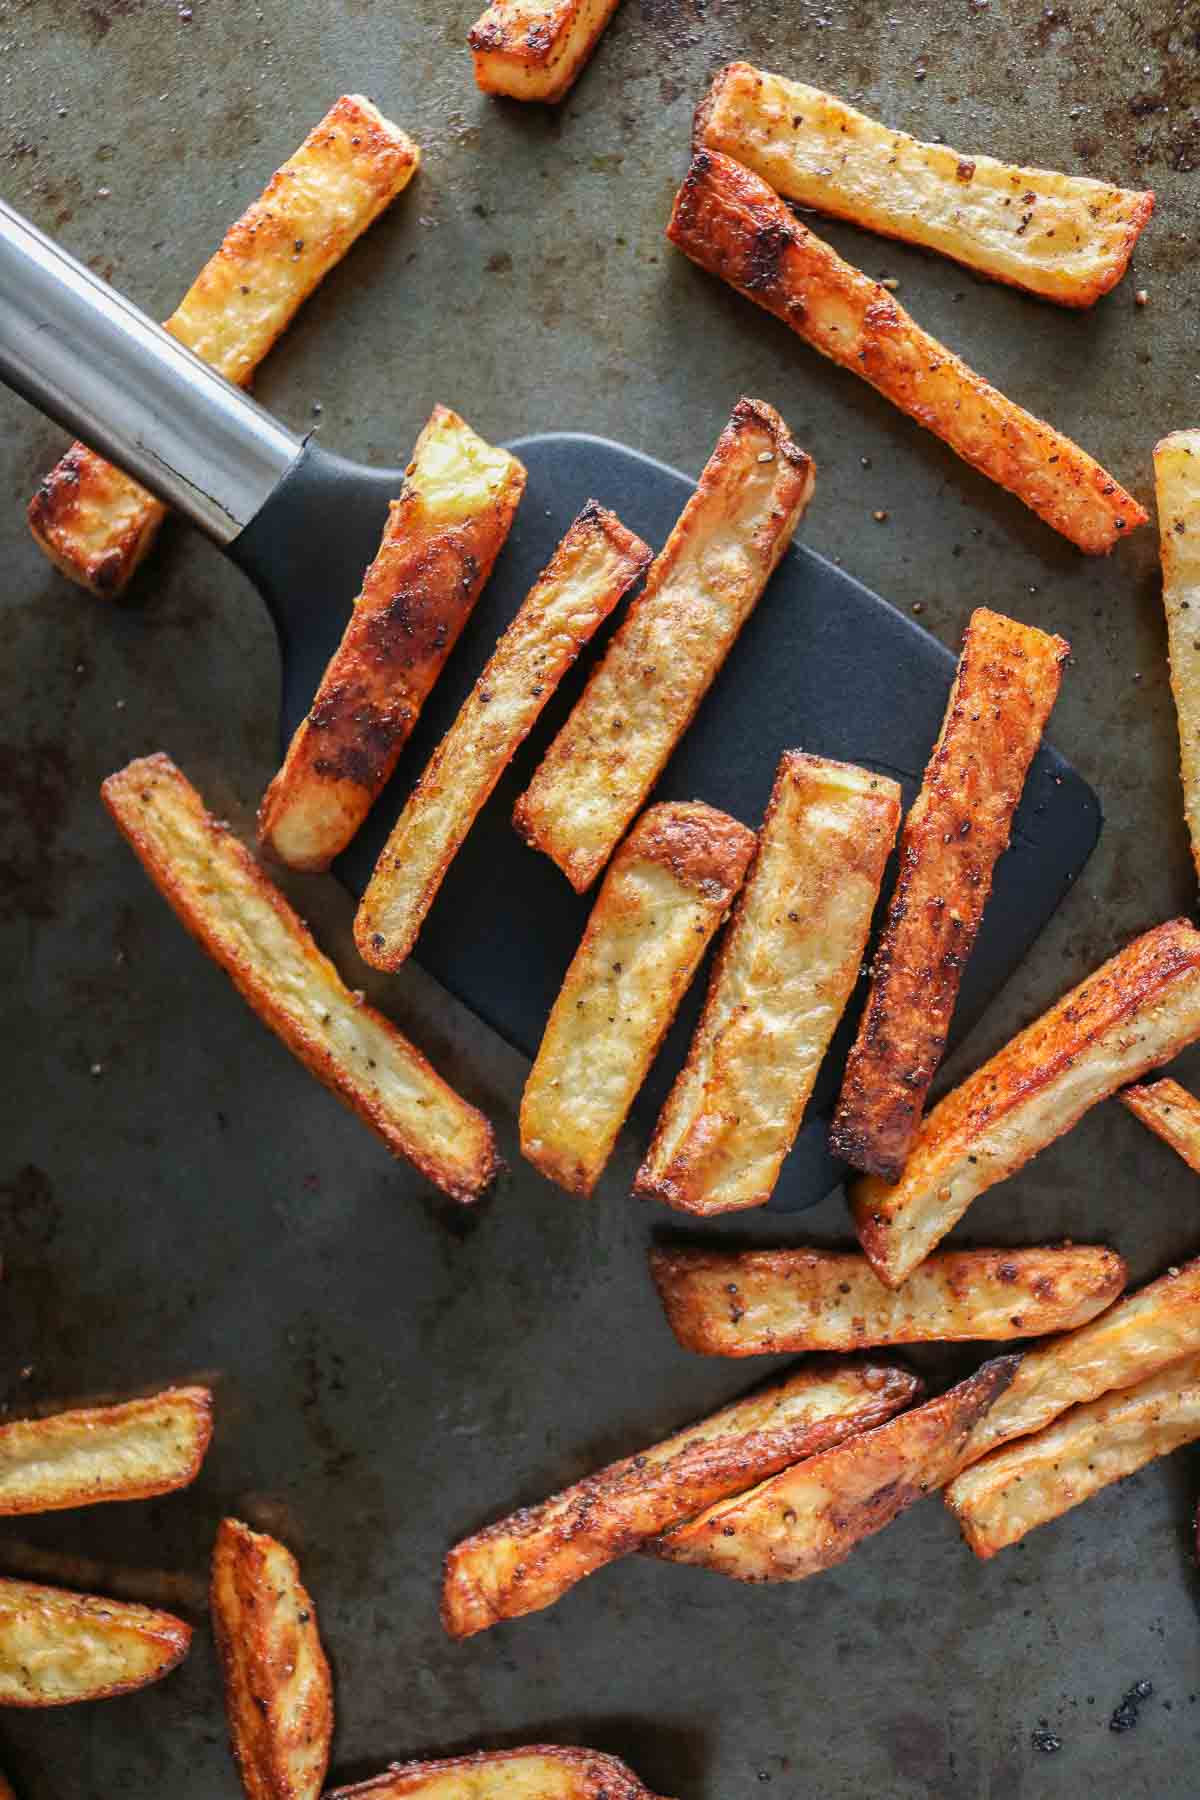 Spatula scooping up baked fries from a sheet pan.